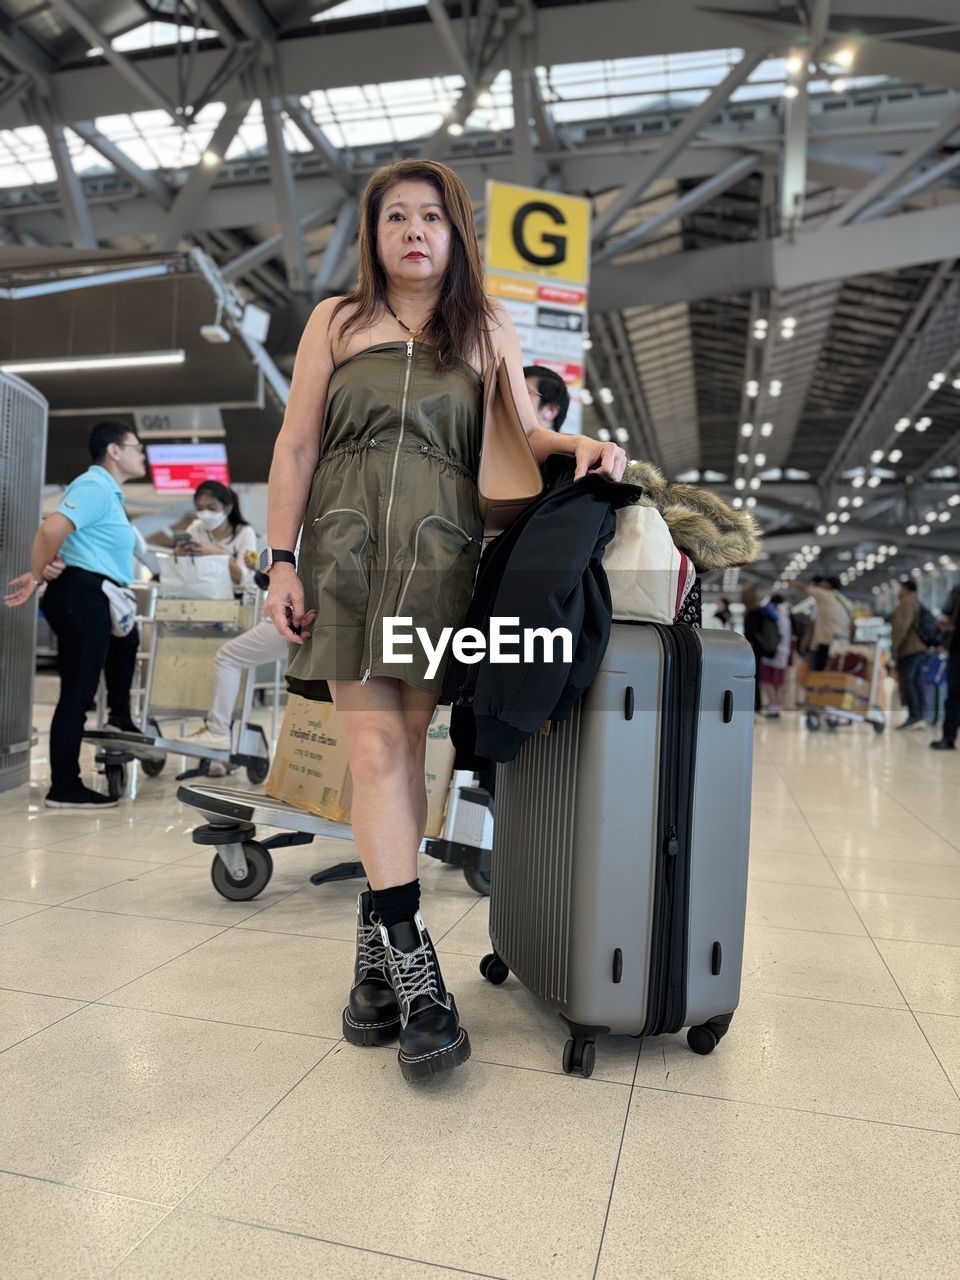 adult, travel, women, indoors, luggage, full length, airport, transportation, suitcase, journey, standing, smiling, female, air vehicle, happiness, young adult, mode of transportation, luggage and bags, portrait, passenger, looking at camera, clothing, trip, fashion, emotion, vacation, holiday, walking, front view, group of people, holding